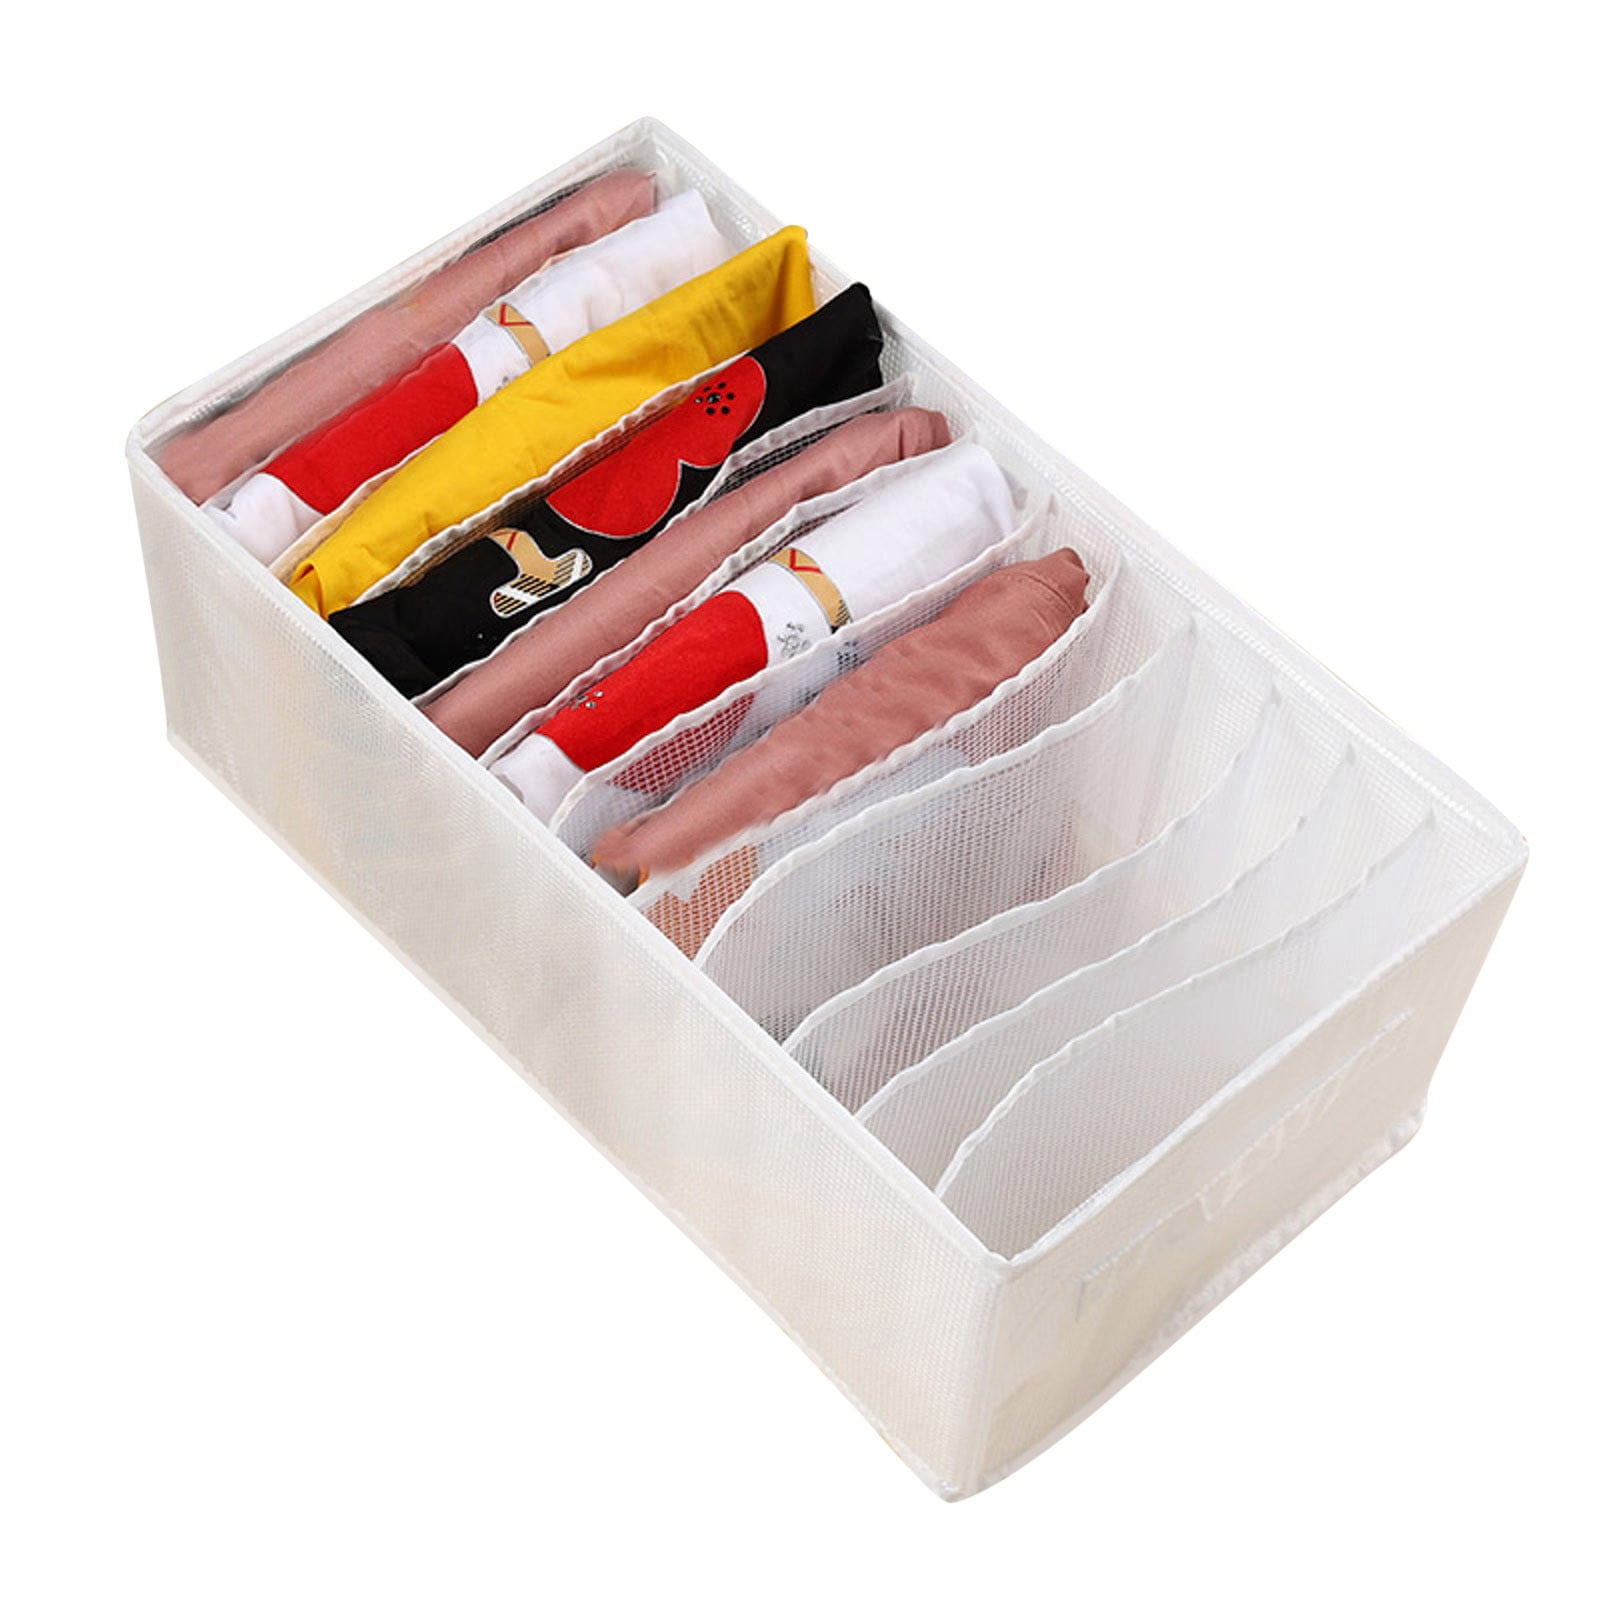 Moving Closet Clear Containers for Organizing Clothes Box PP Storage Bag Compartment Storage Mesh Box Drawer Clothes Clip Board Compartment Pants